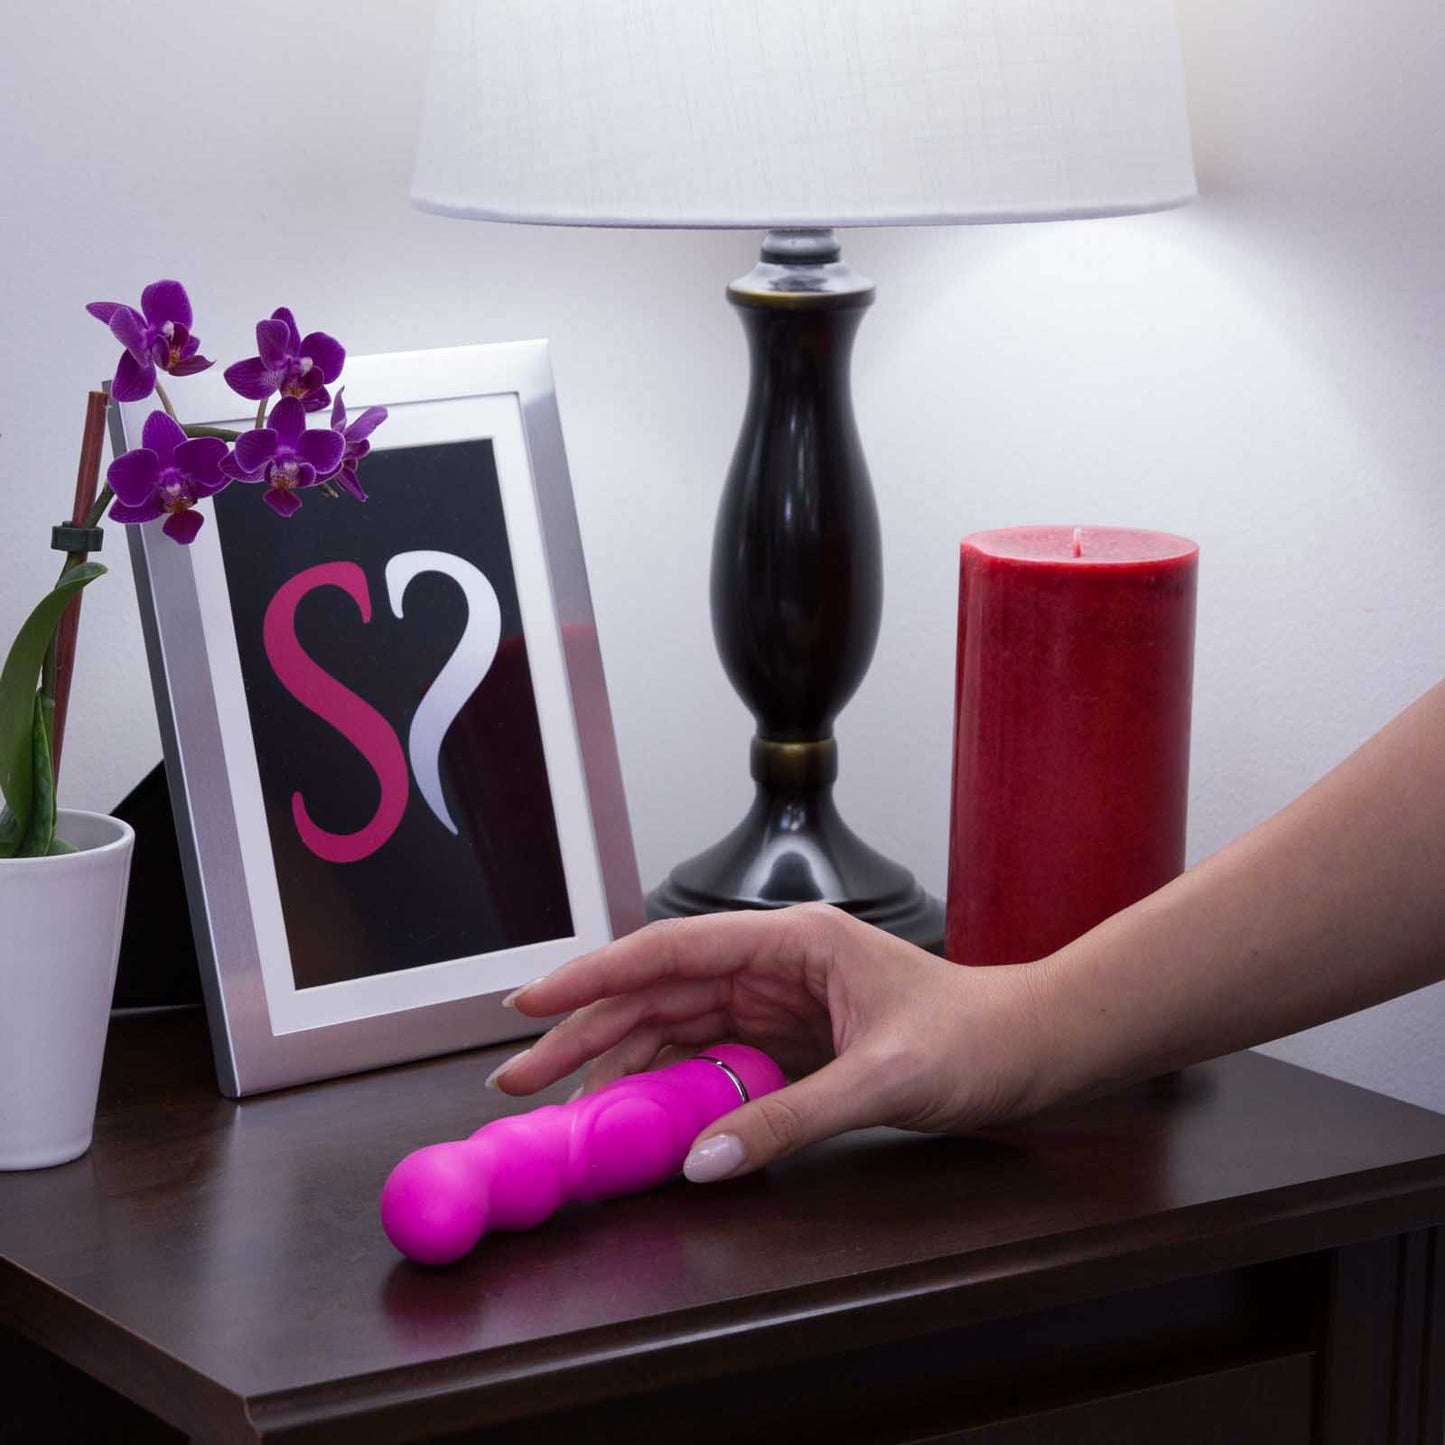 Posh Silicone Teaser 1 Vibe in Pink